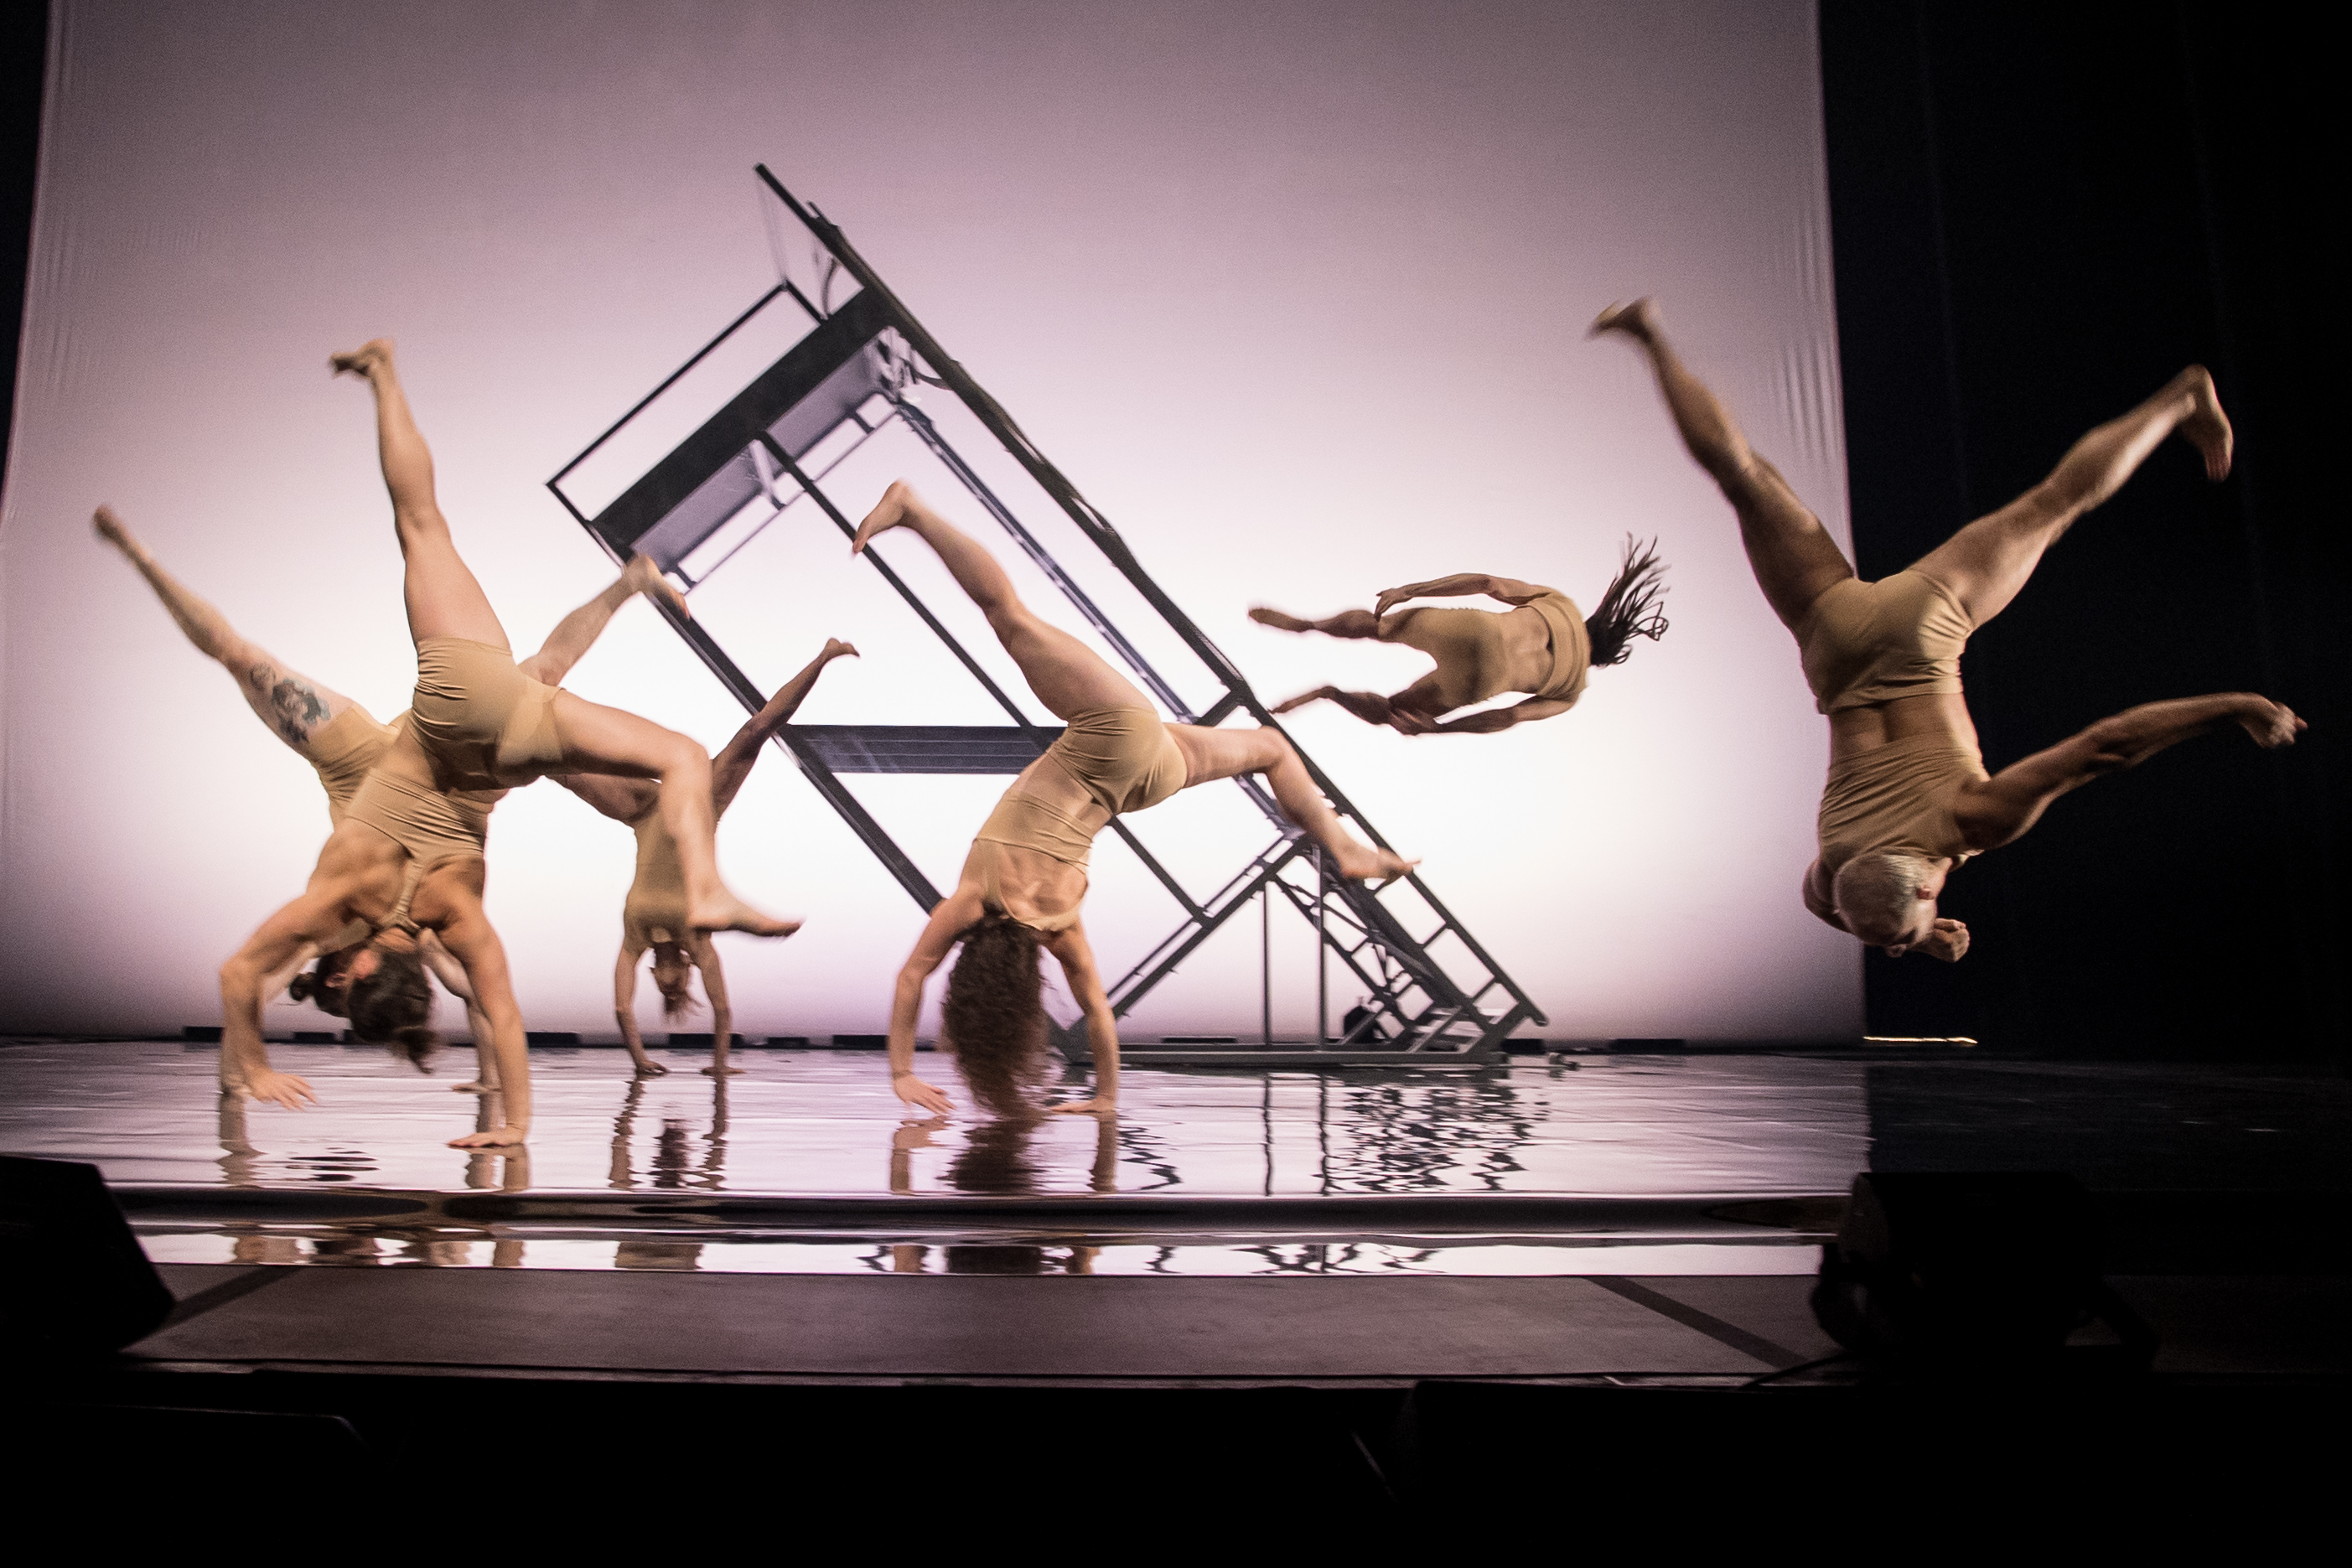 4 acrobats on stage against a light backdrop doing cartwheels and flips